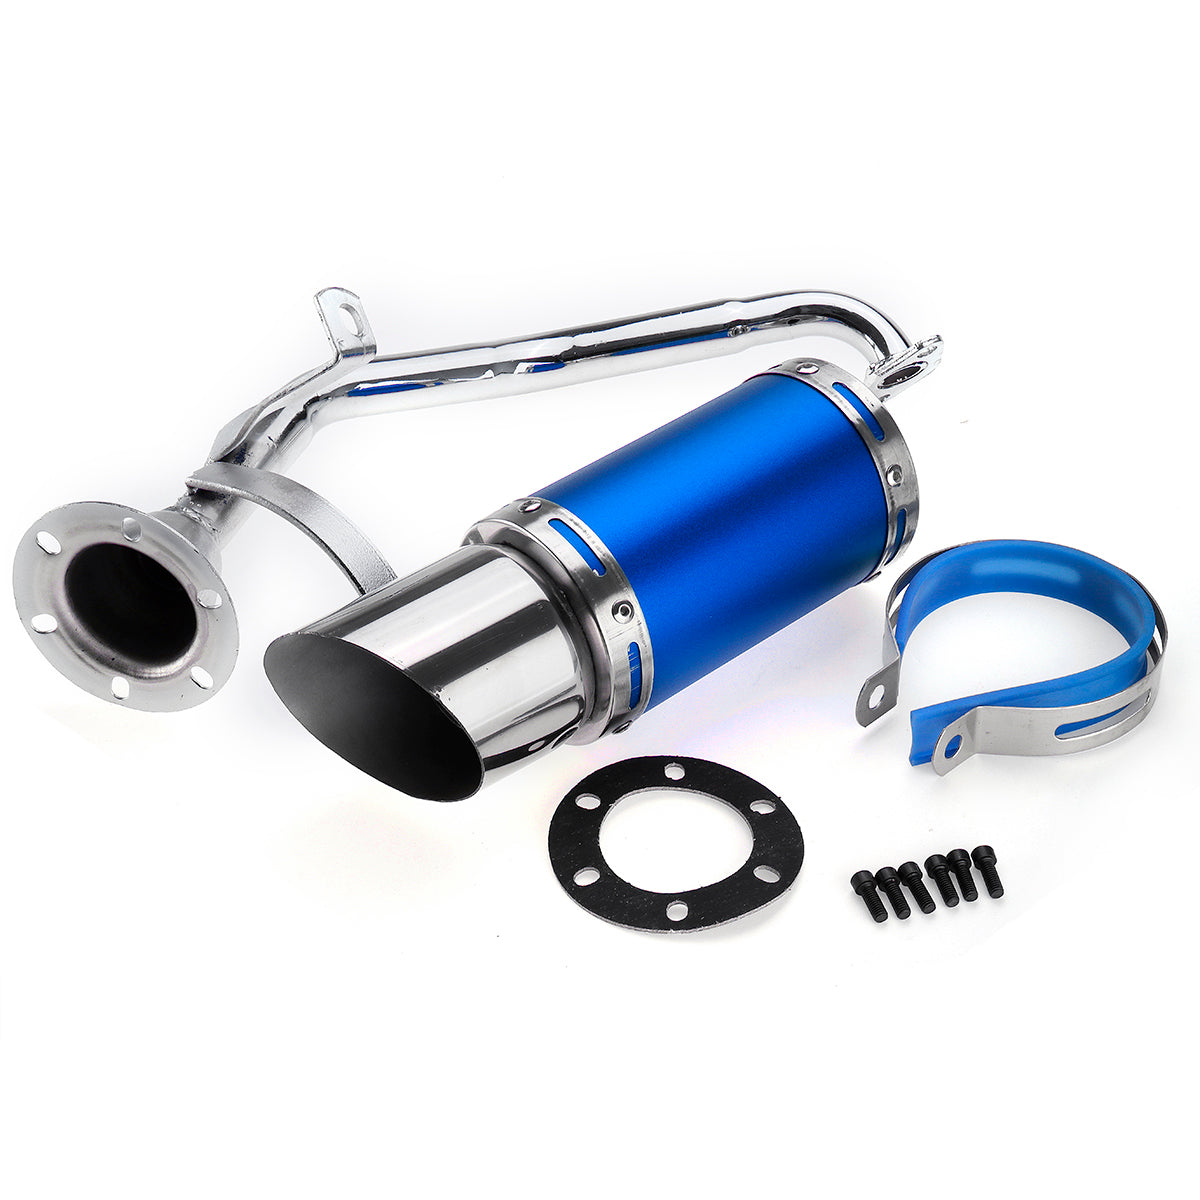 Royal Blue 50mm/2in Motorcycle Exhaust System Stainless Steel Short Carbon Fiber For GY6 49cc 50cc 125cc 150cc 200cc 4 Stroke Scooter